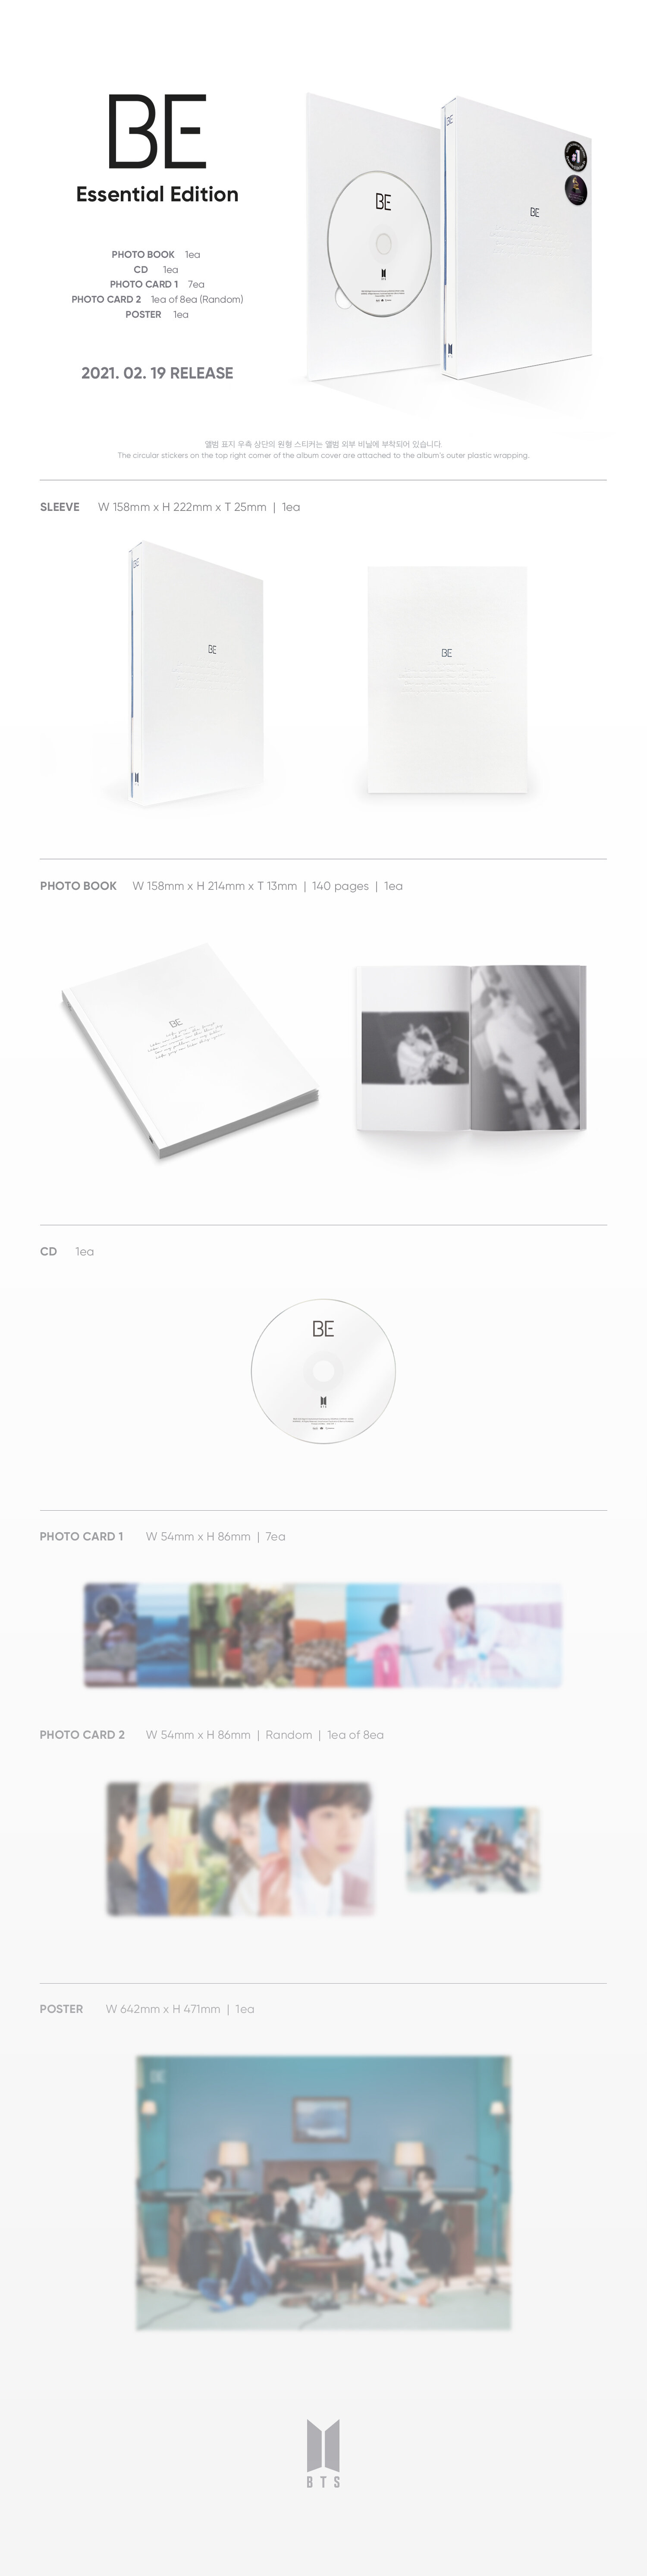 1 CD, PhotoBook, Photo Card 1 (7ea), Photo Card 2 (1 out of 8 random types), Poster - 1 type